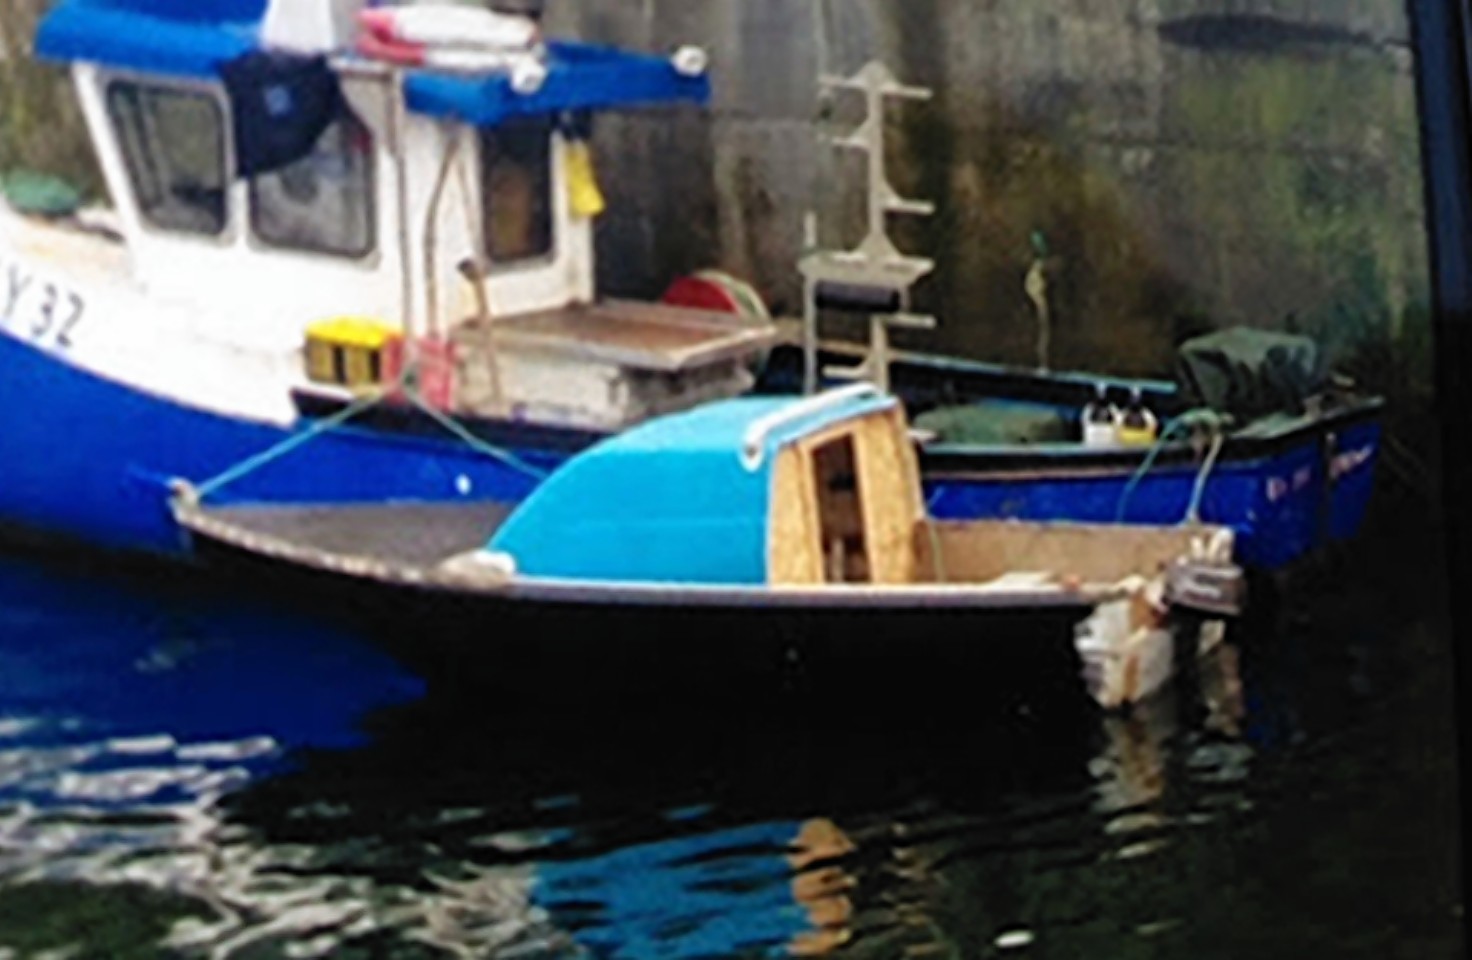 The boat believed to belong to the missing sailor